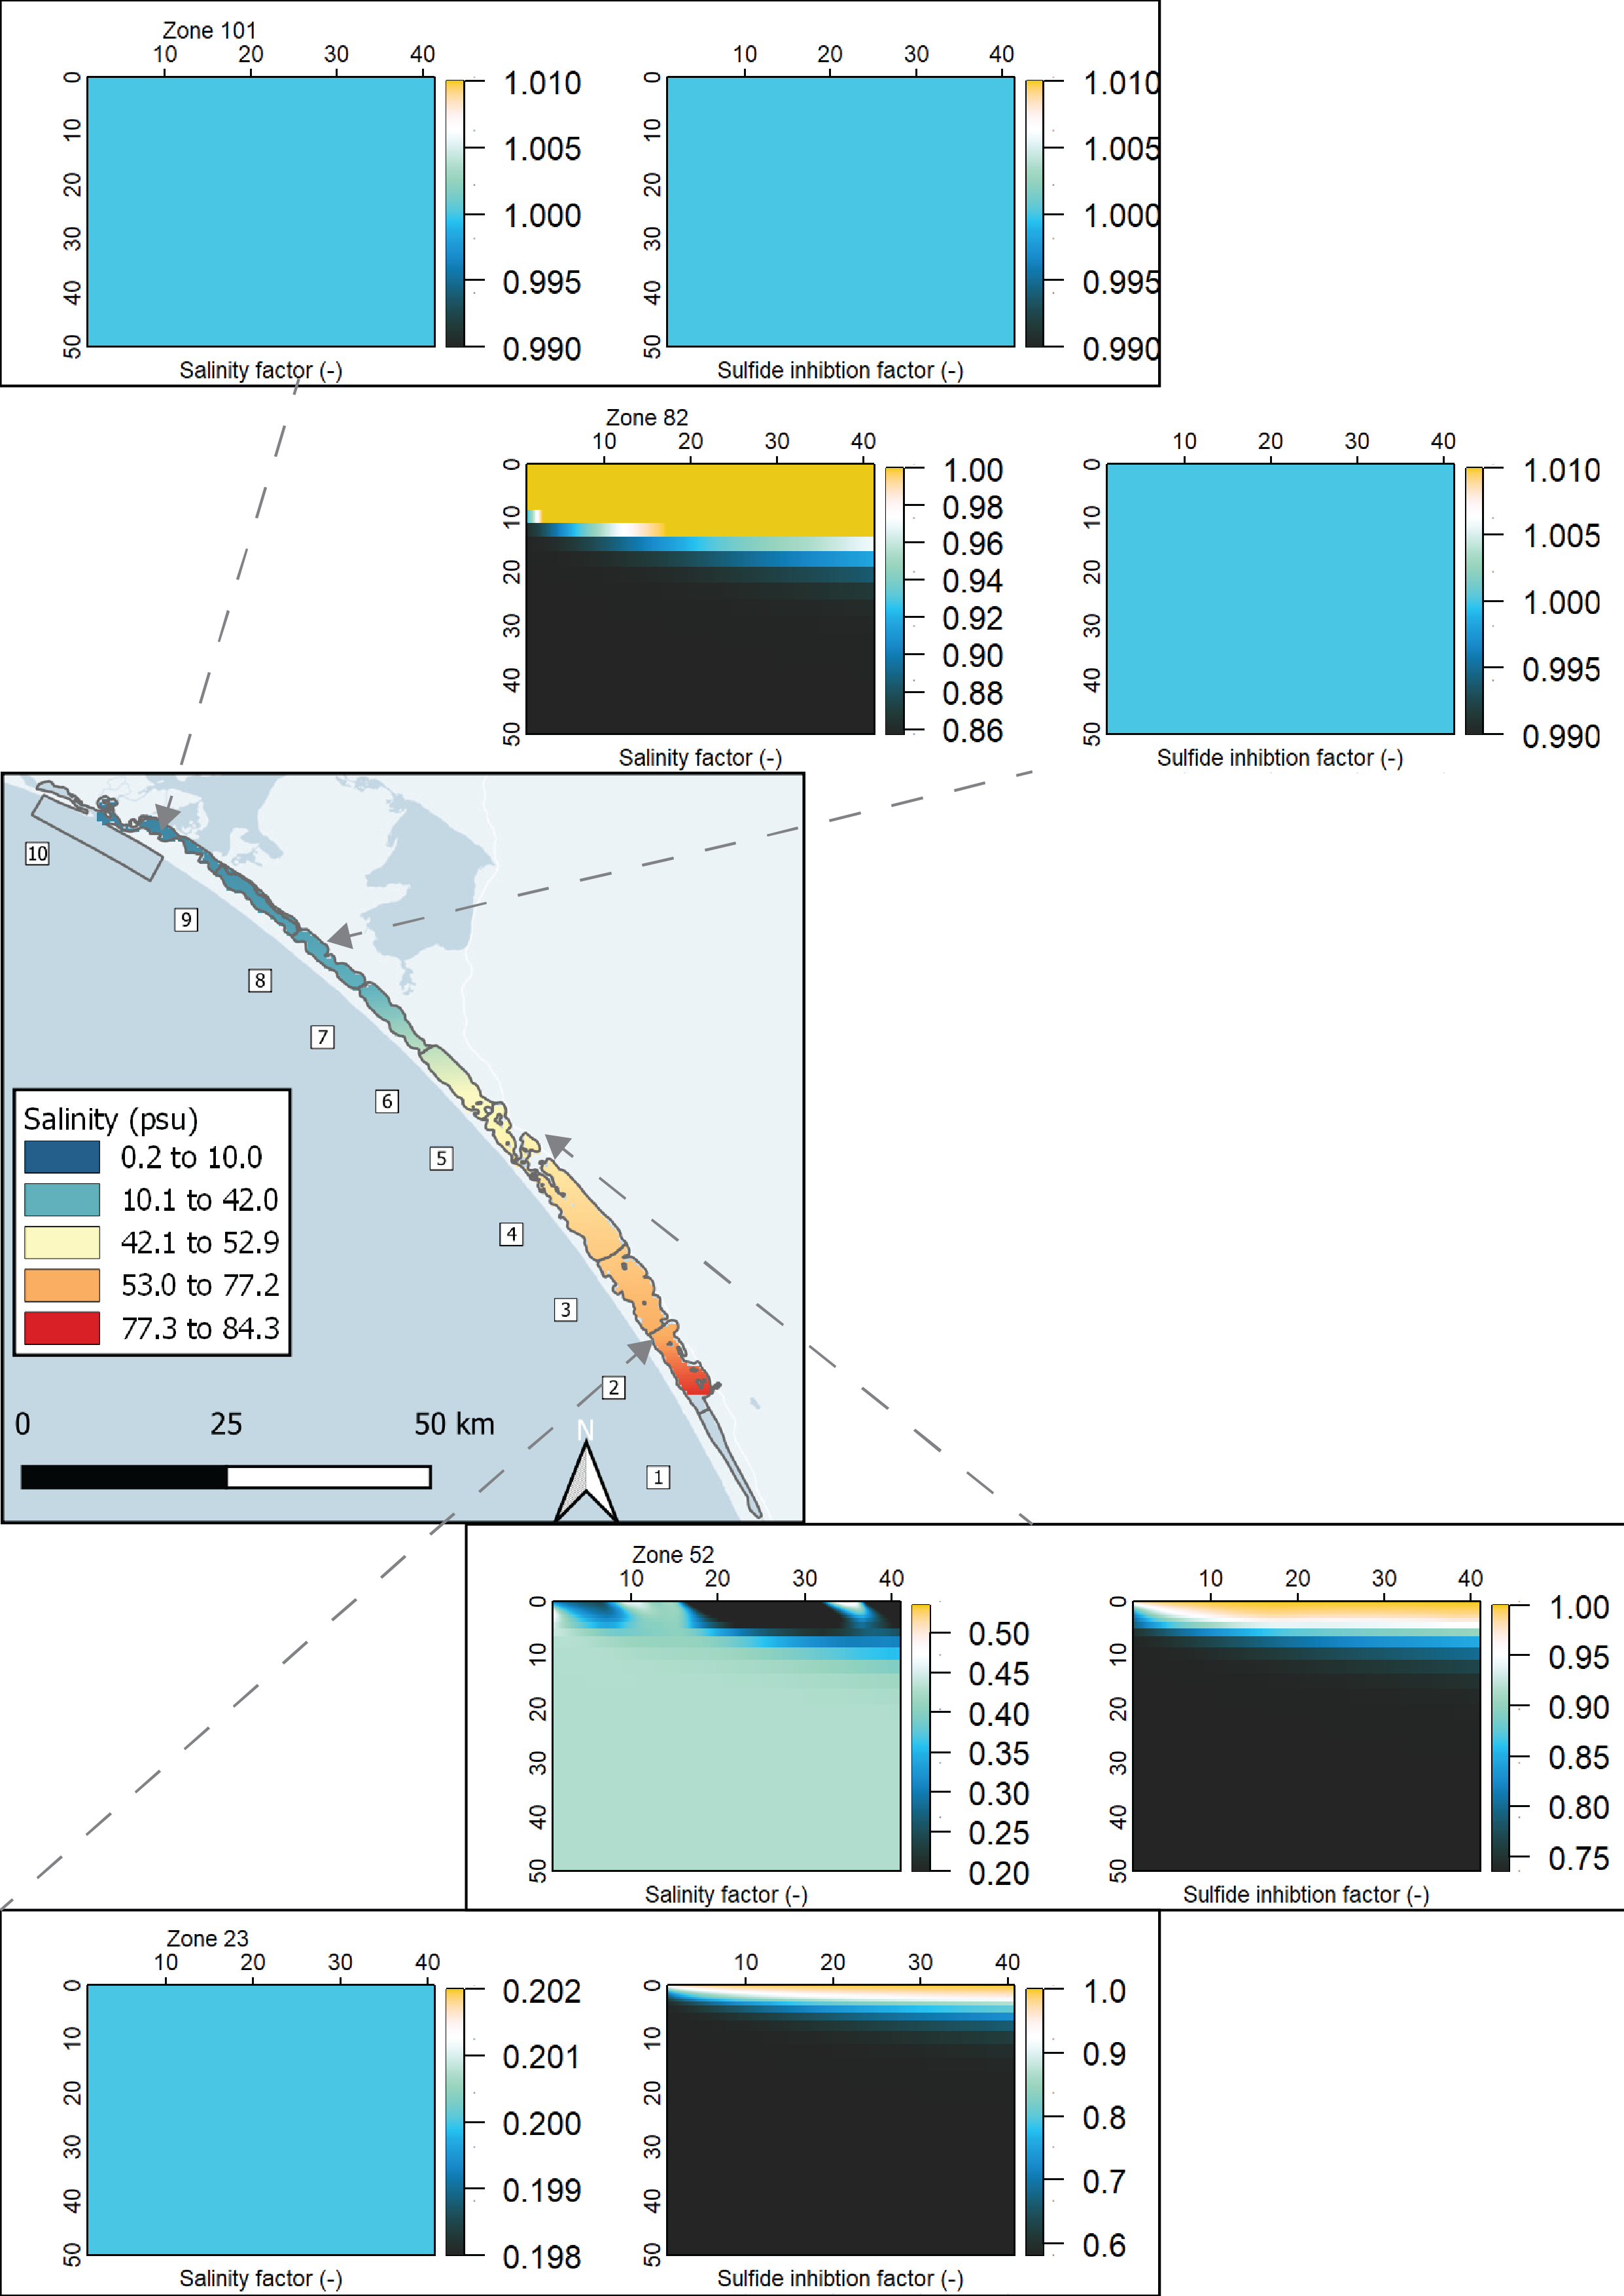 Time-magnitude-depth profiles of $F_{Sal}$ and $F_{Sul}$ inhibition factors in four of the sediment zones, from north to south. The central figure shows the interpolated salinity from the UA survey. The higher salinity and higher $H_2S$ in the southern zones resulted in greater inhibition of other processes.